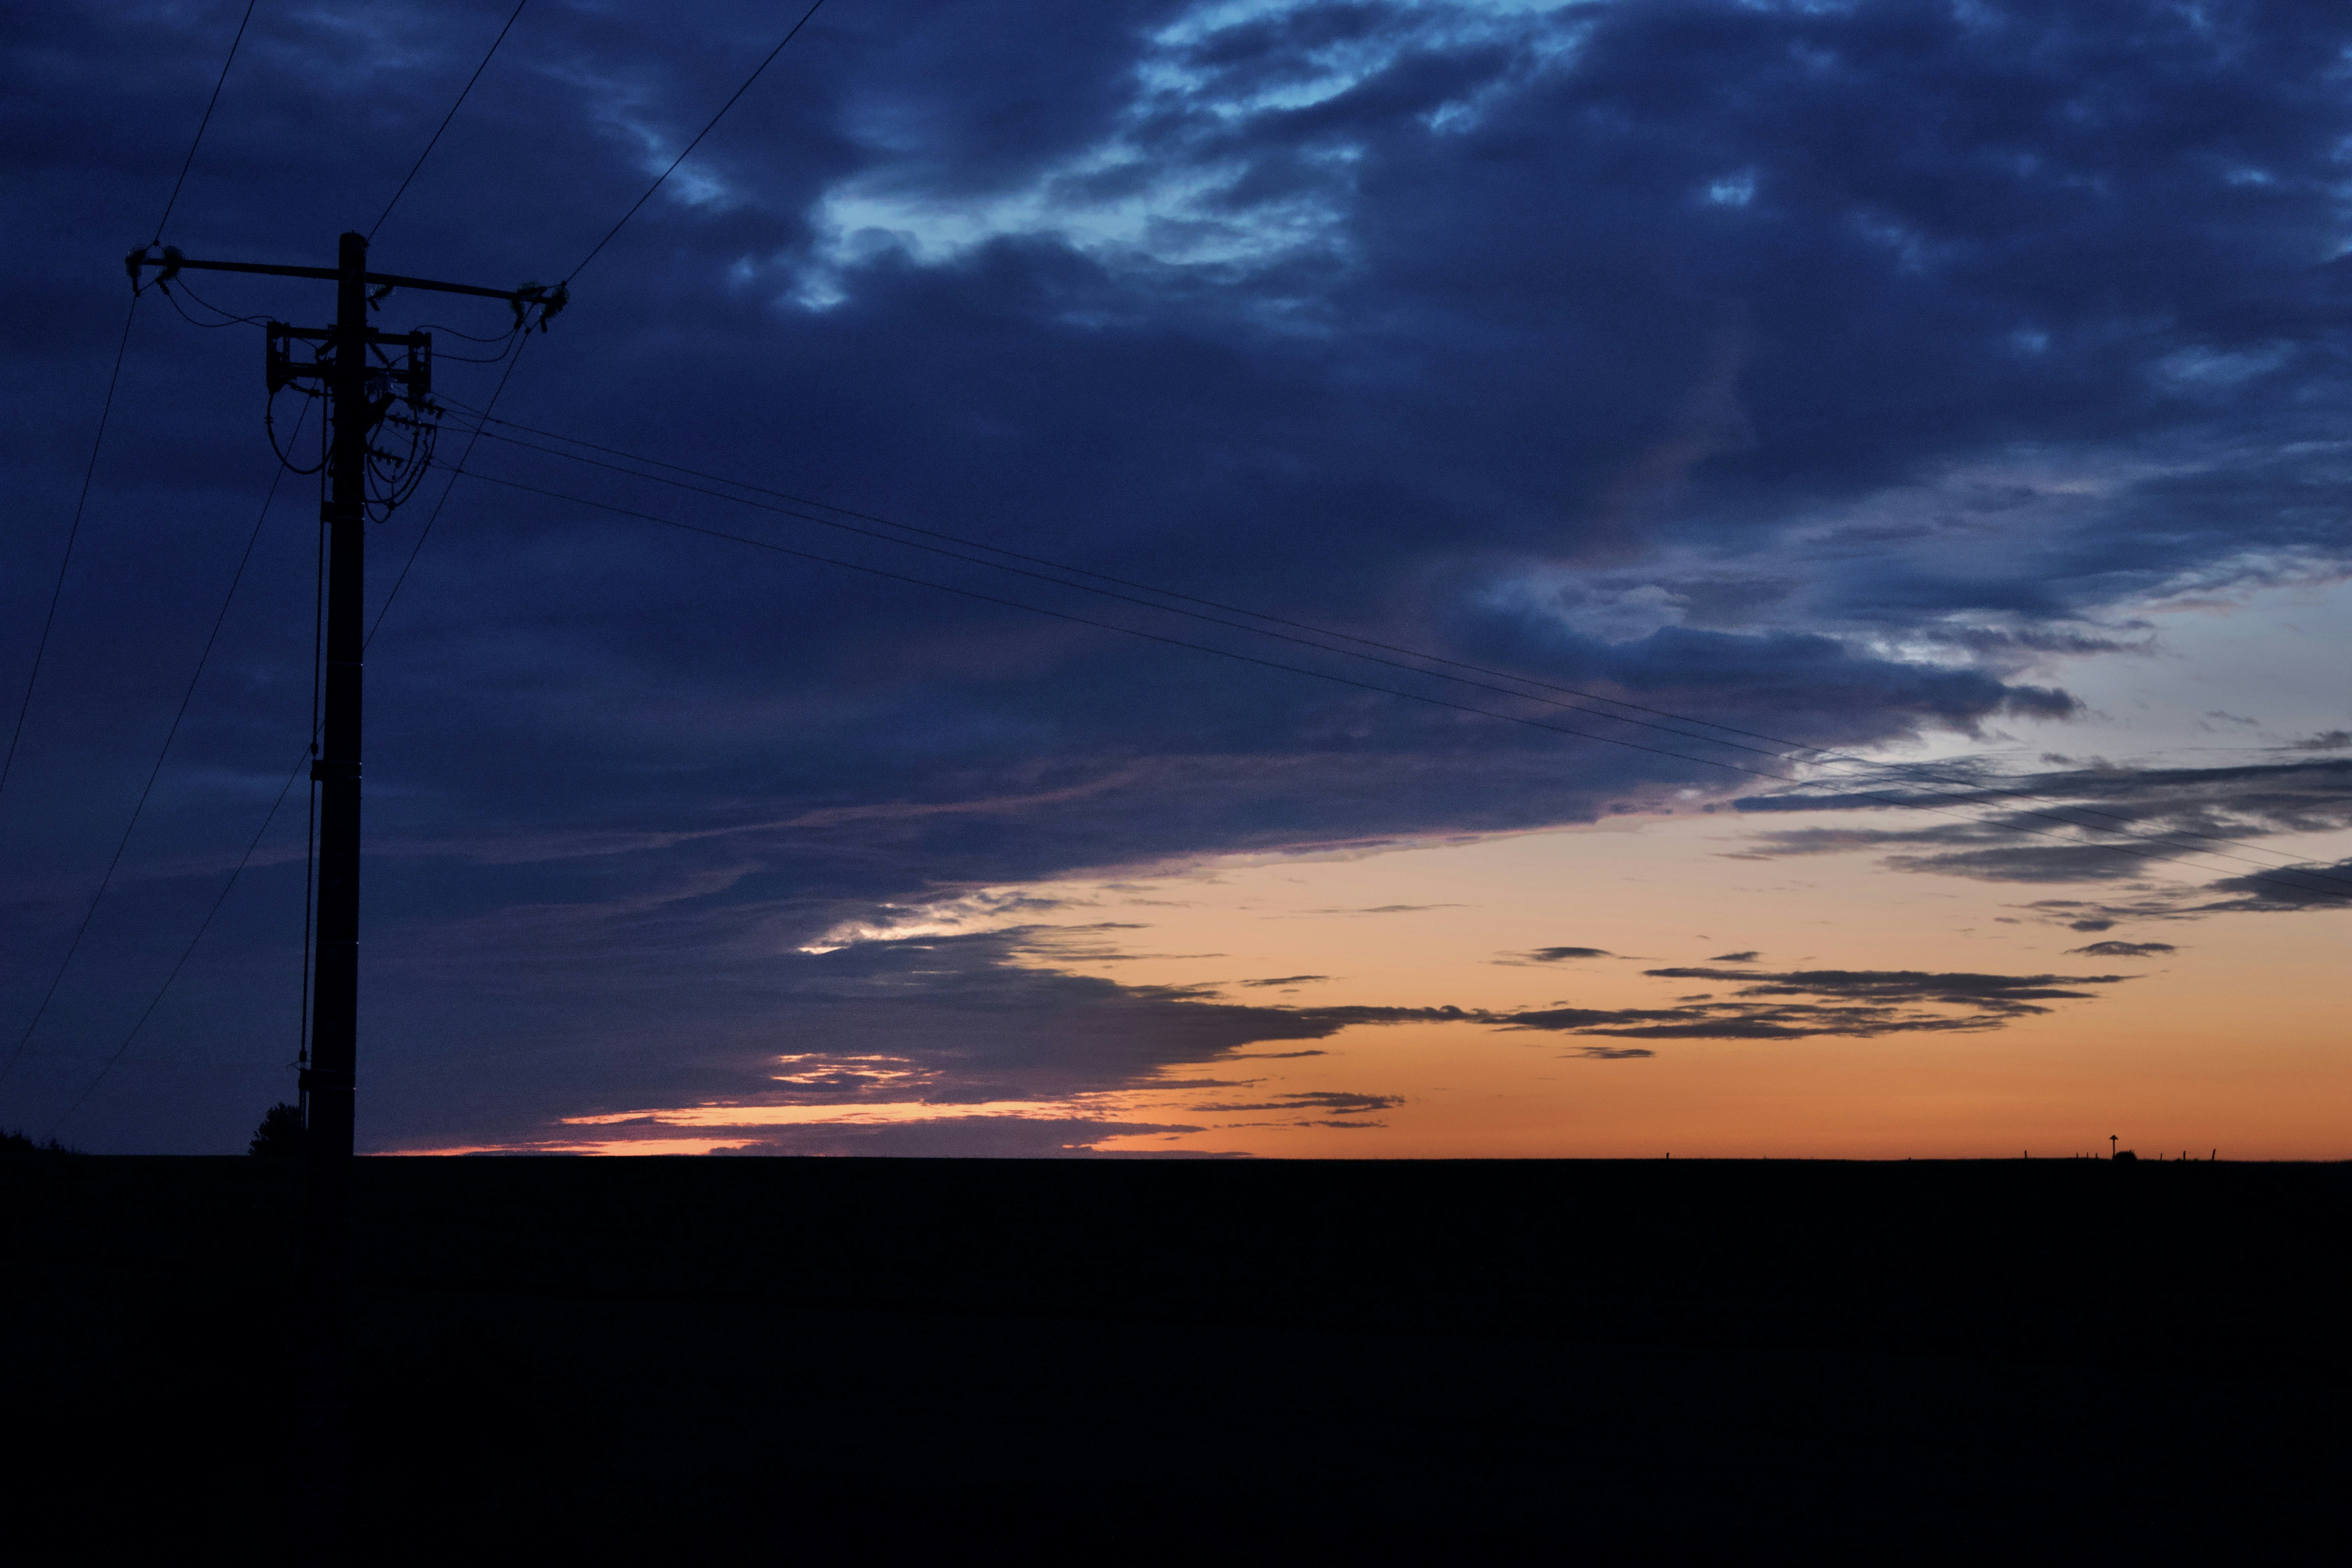 silhouette of electric post during sunset